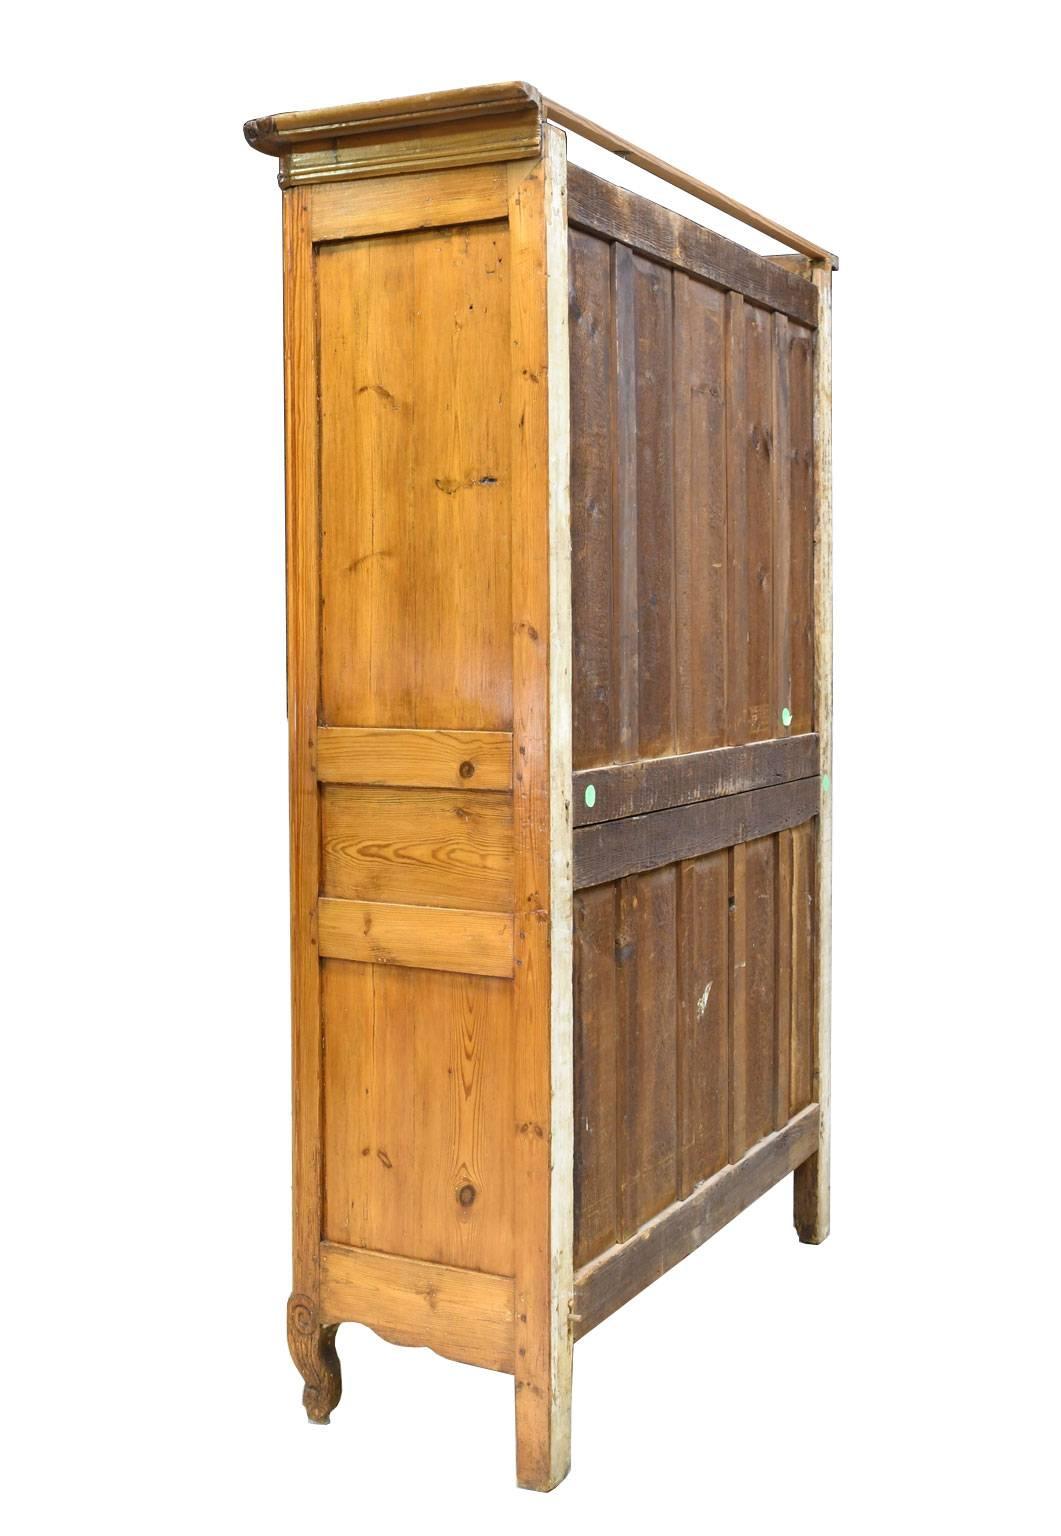 Hand-Carved 18th Century French Marriage Armoire in Pitch Pine from Normandy